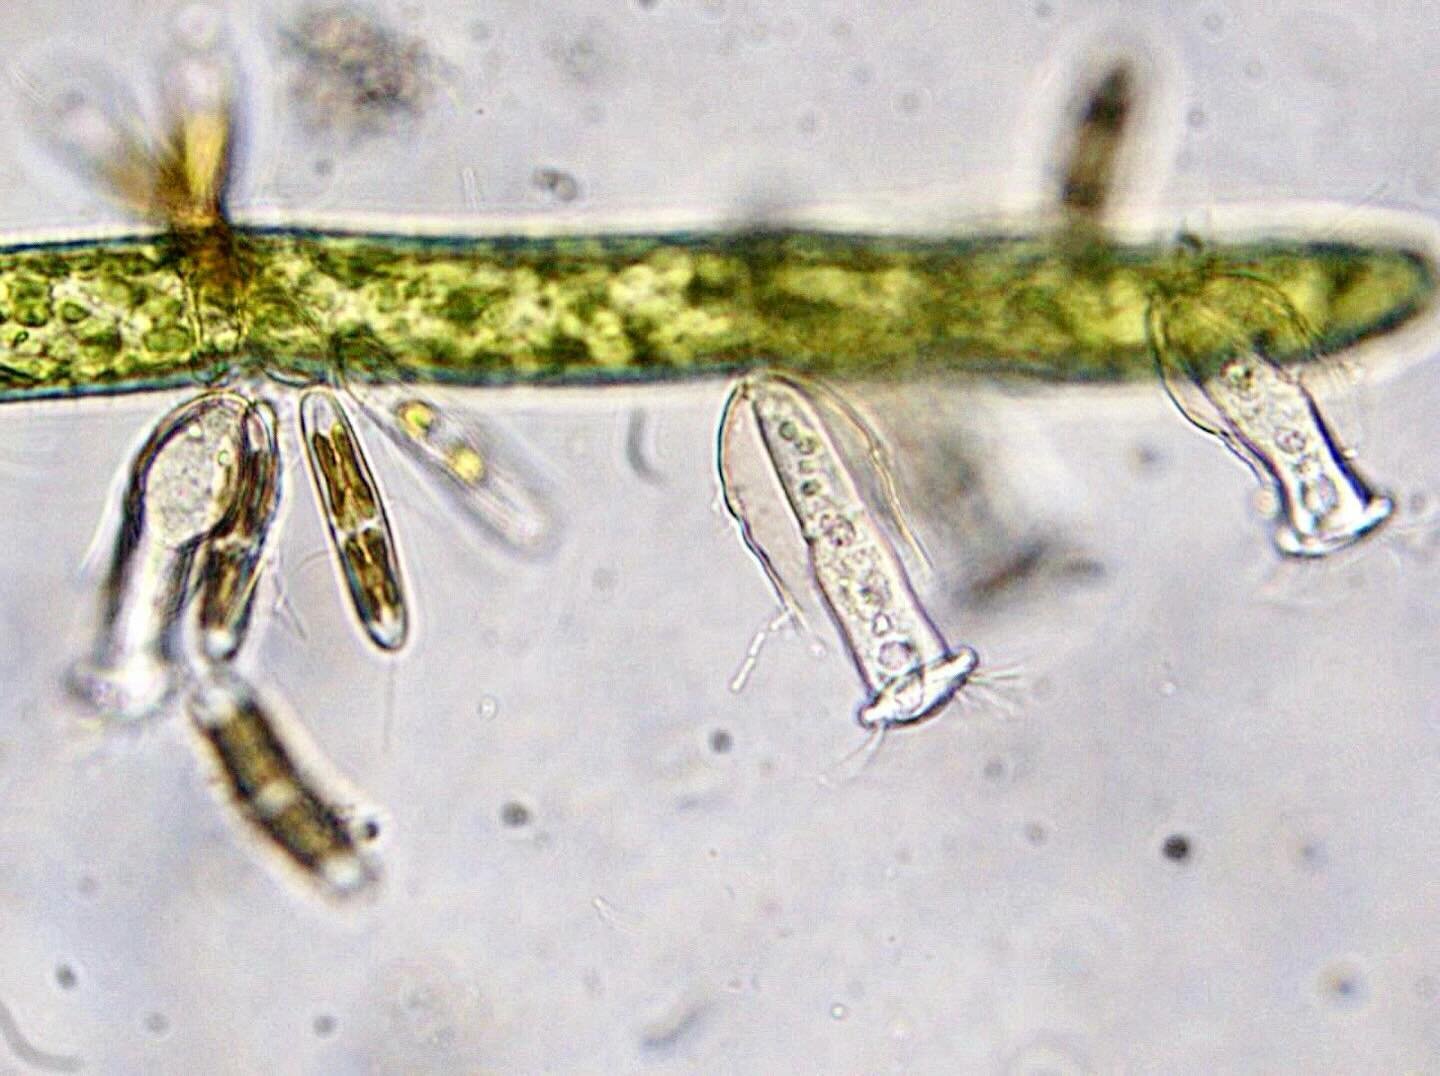 Still from the video &ldquo;Ciliates and diatoms on green algae.&rdquo;
.
Filamentous algae like the Oedogonium sp. shown here are barely visible in a jar of water. If you squint really hard, you might see what look like thin green hairs. And anythin